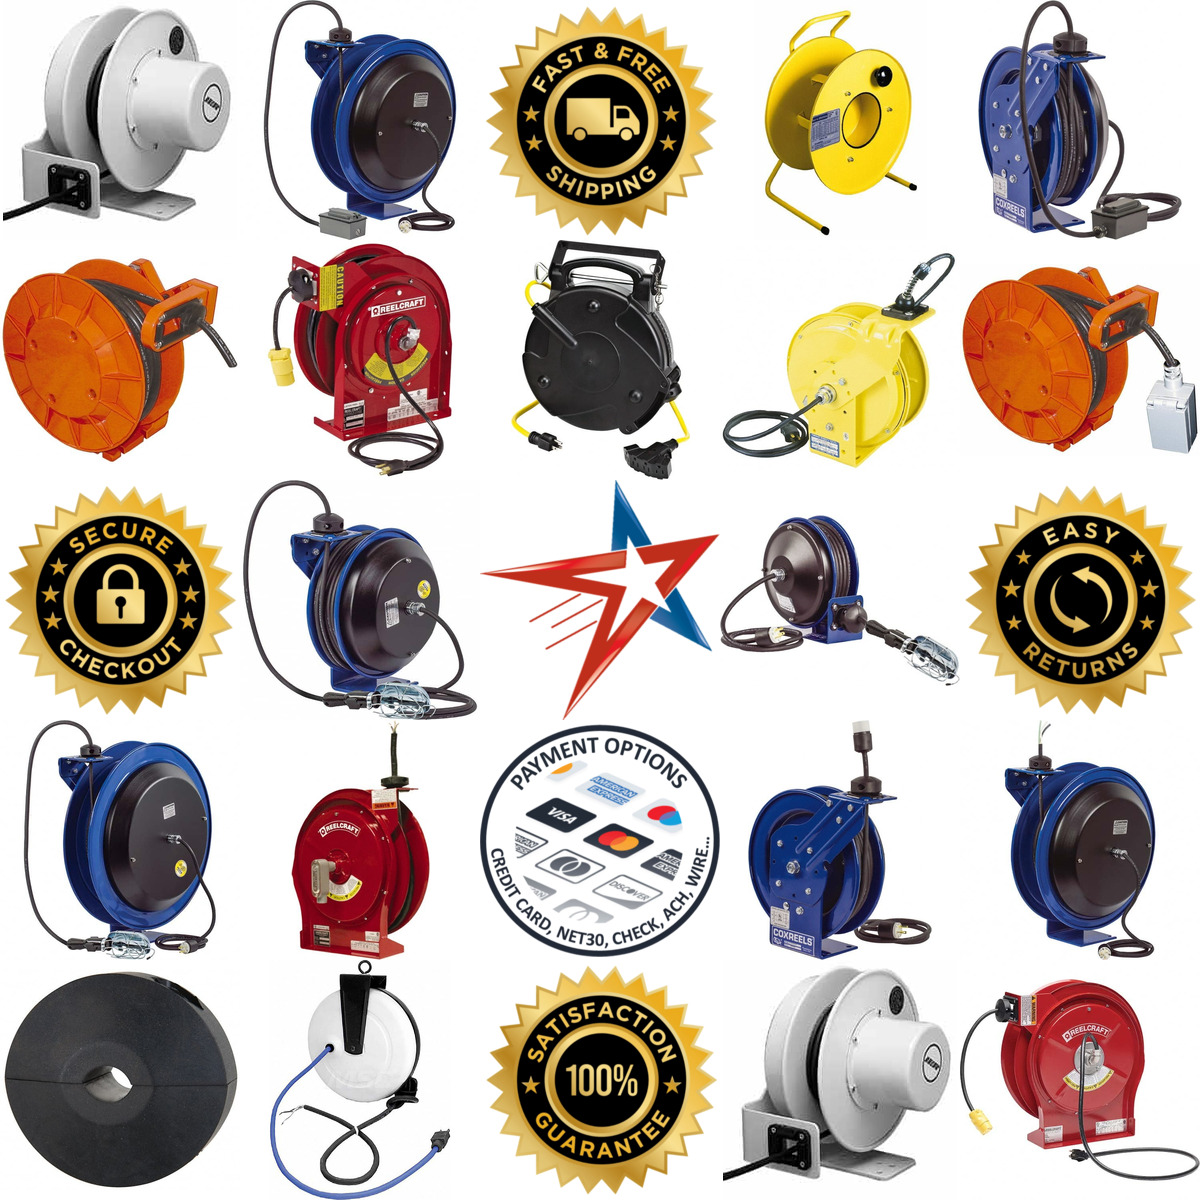 A selection of Electrical Cord and Cable Reels products on GoVets